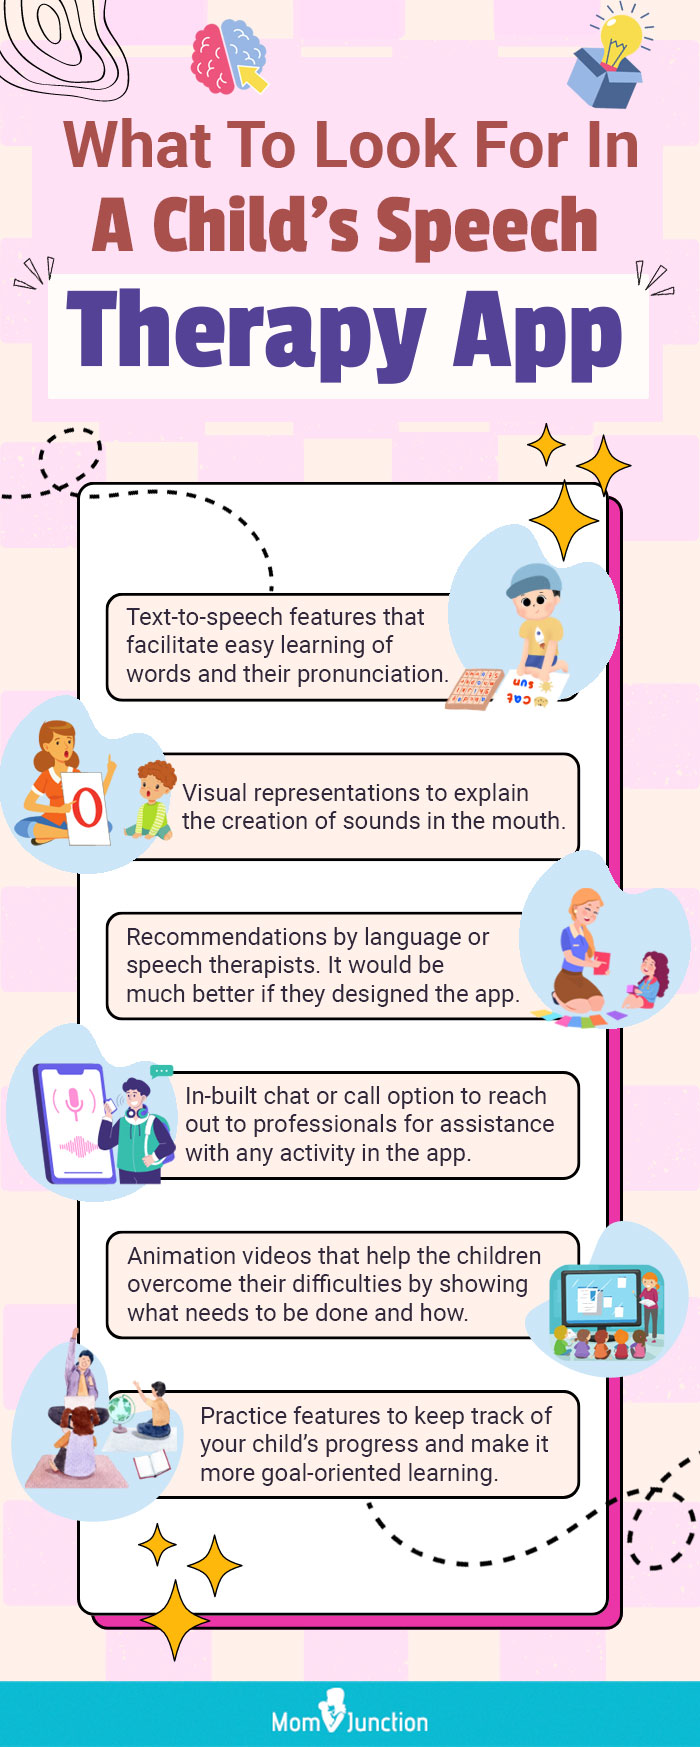 what to look for in a childs speech therapy app (infographic)